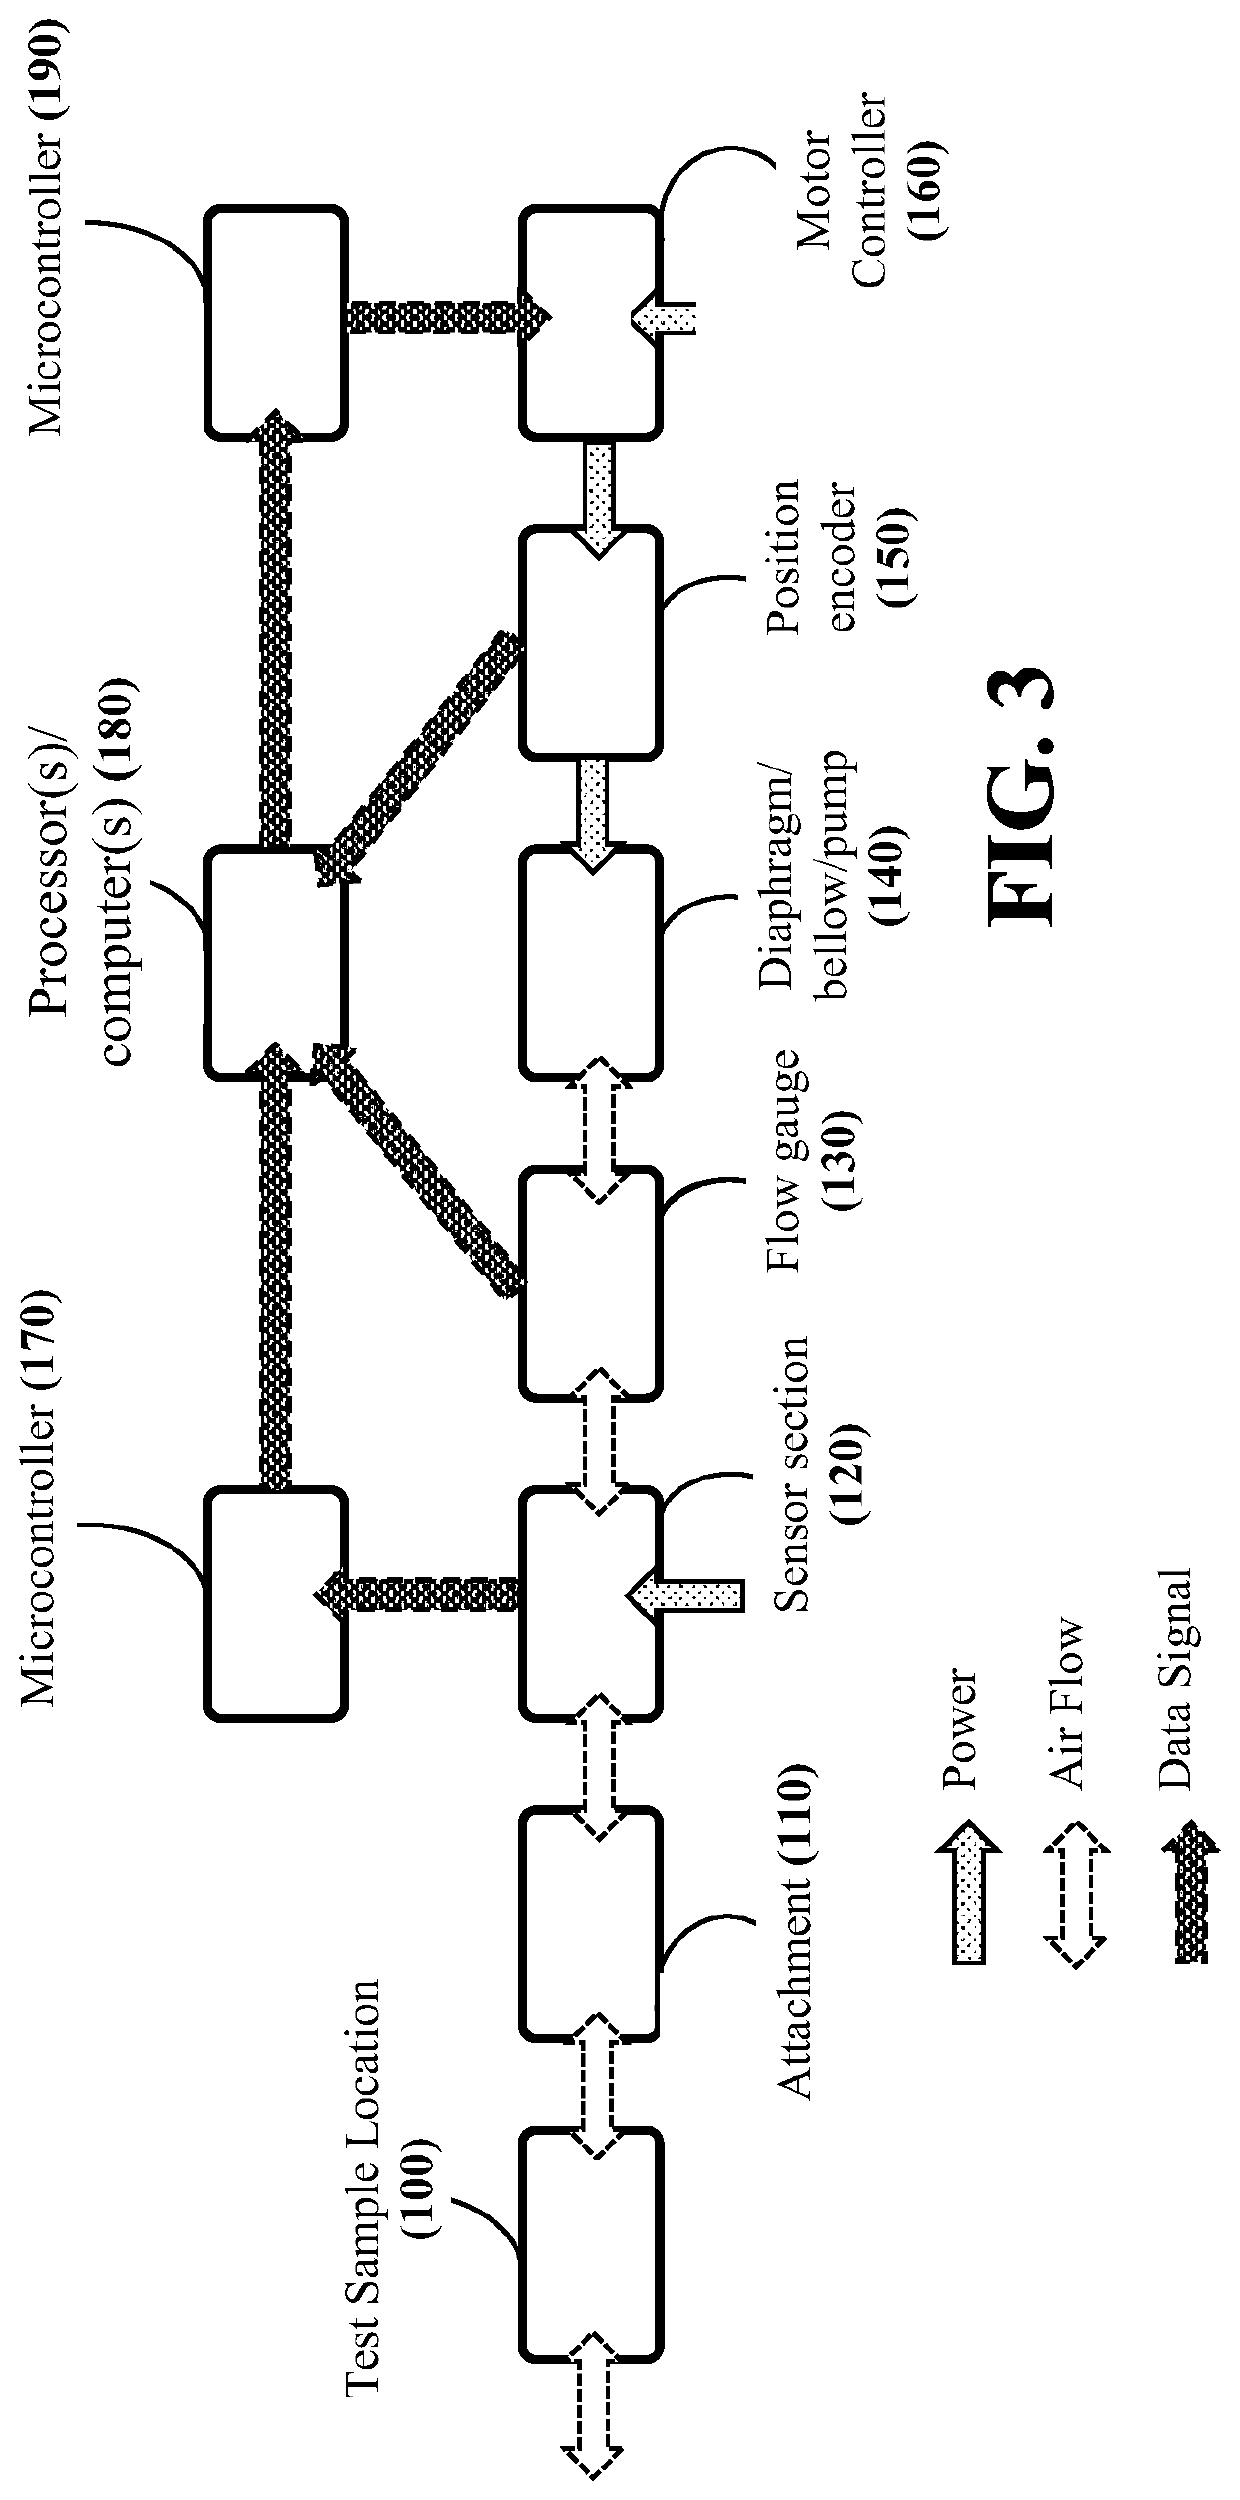 Methods, systems and devices for agent detection